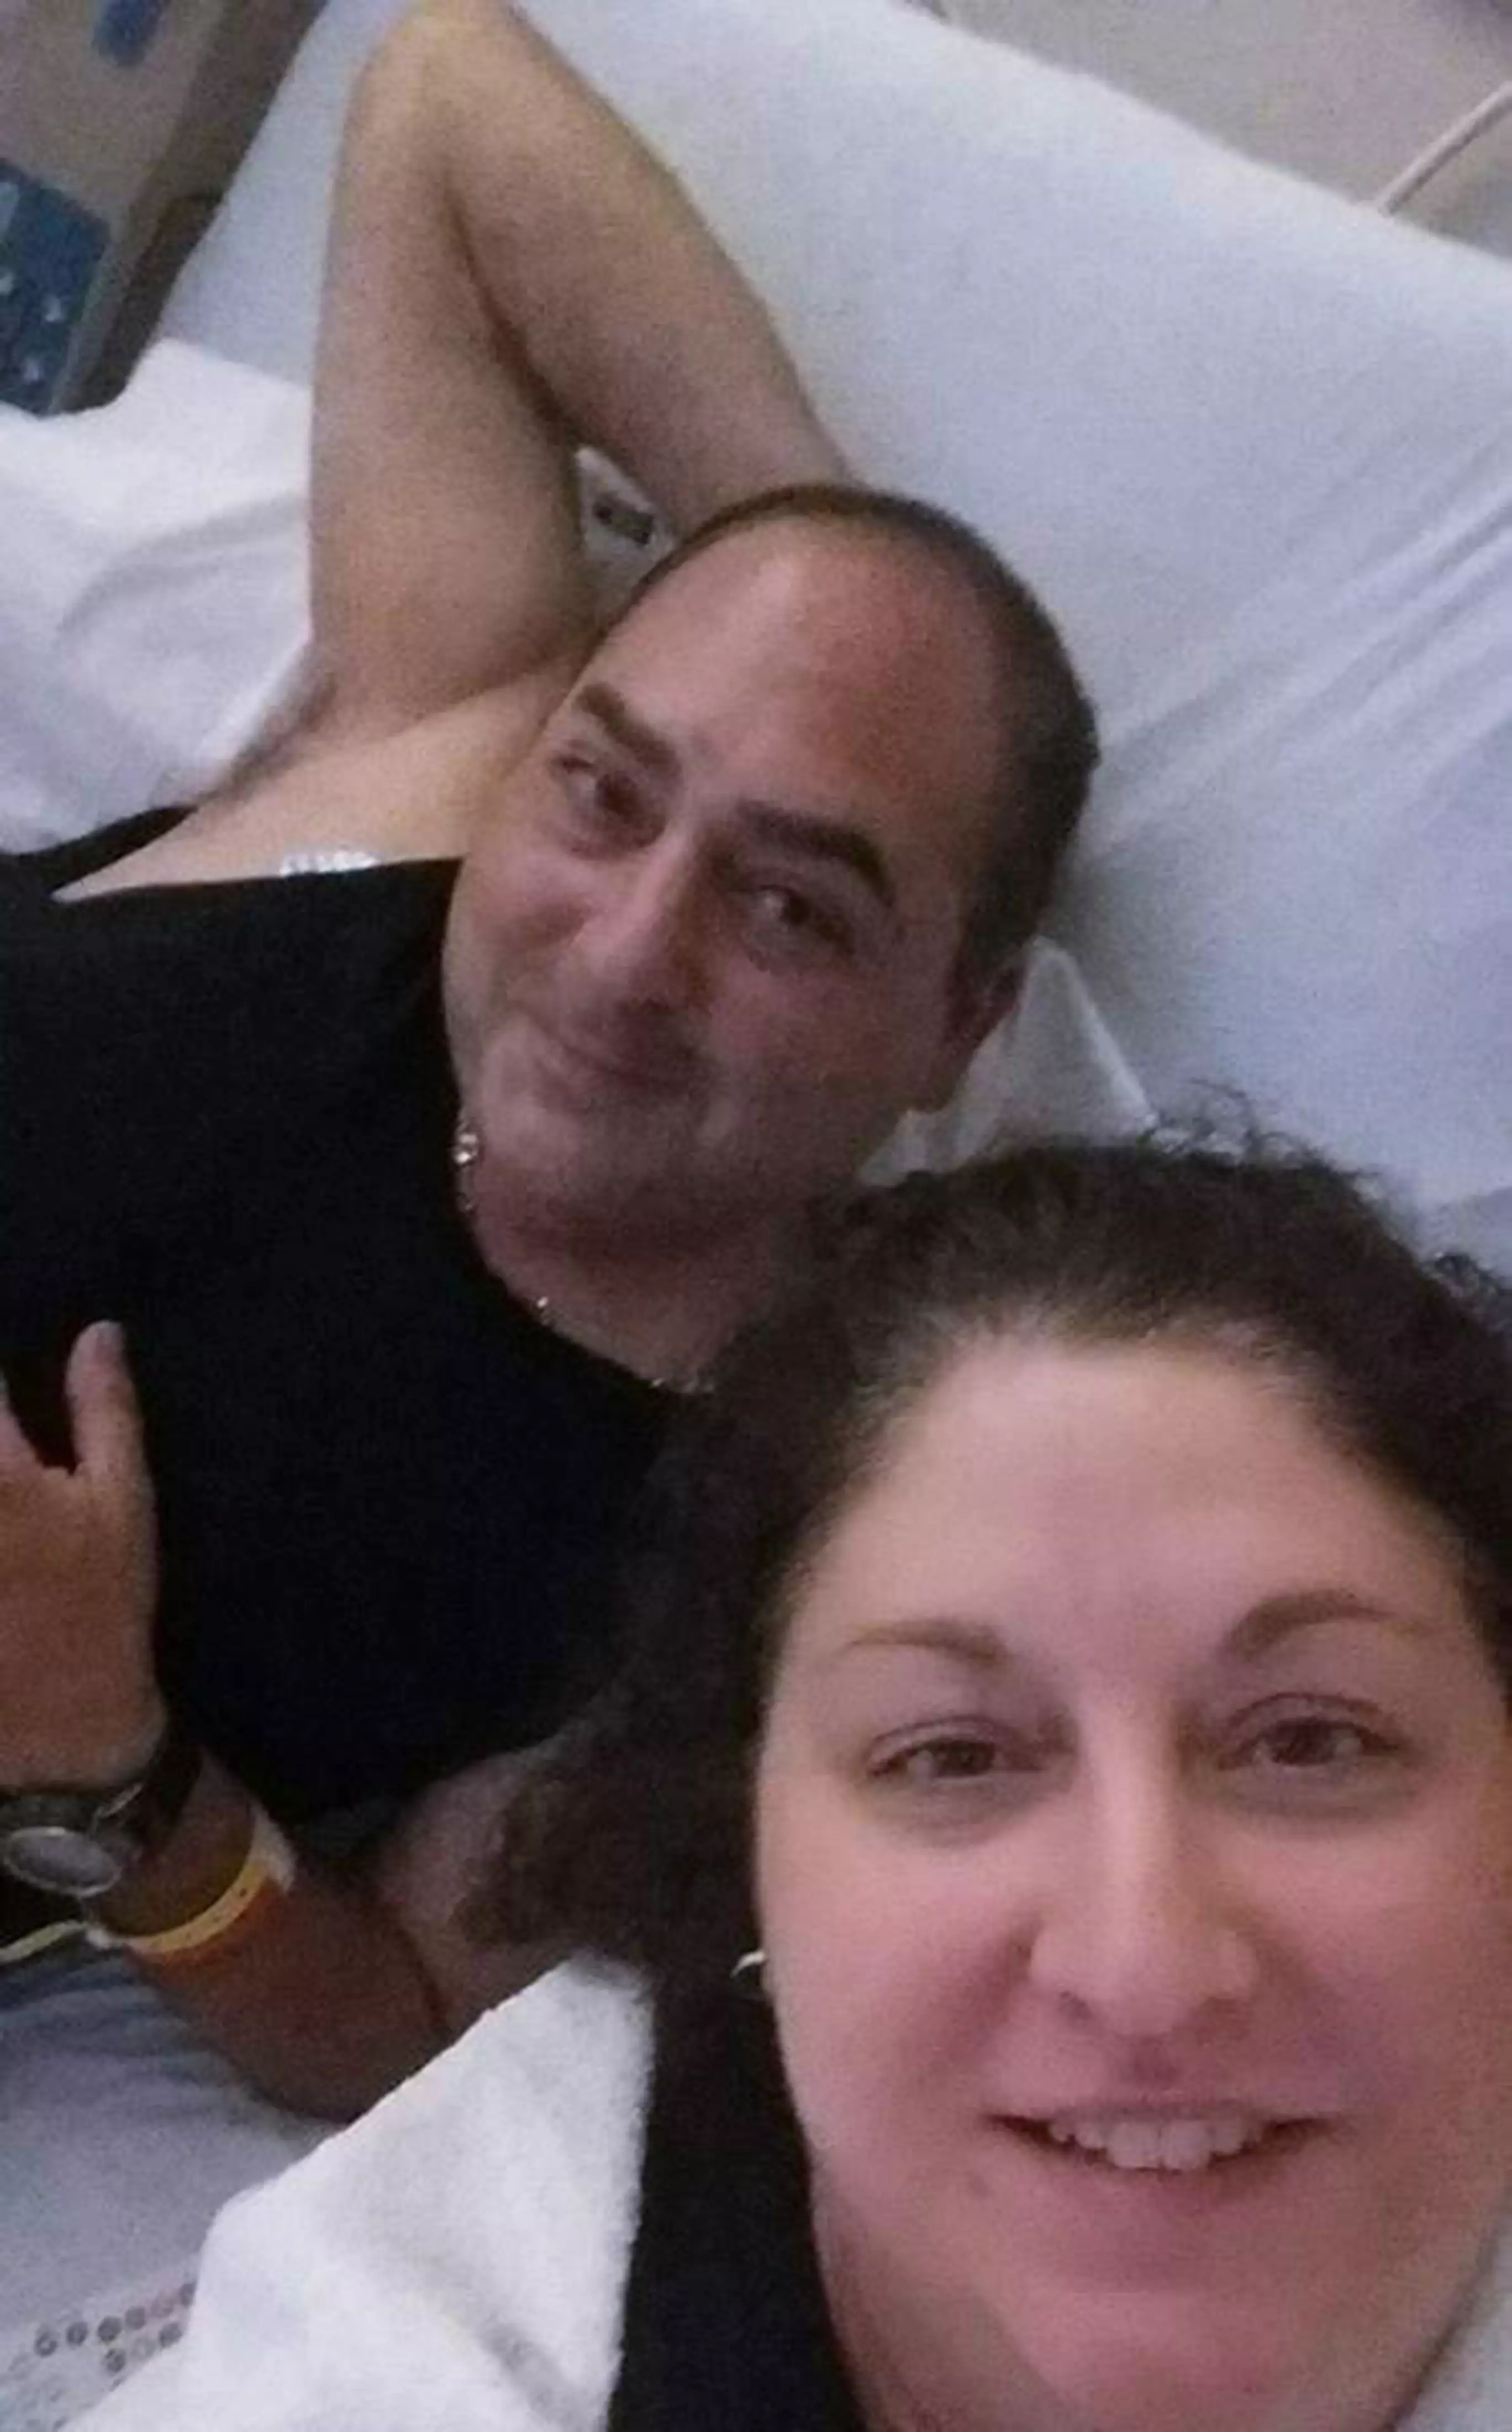 Danny and his wife in hospital.